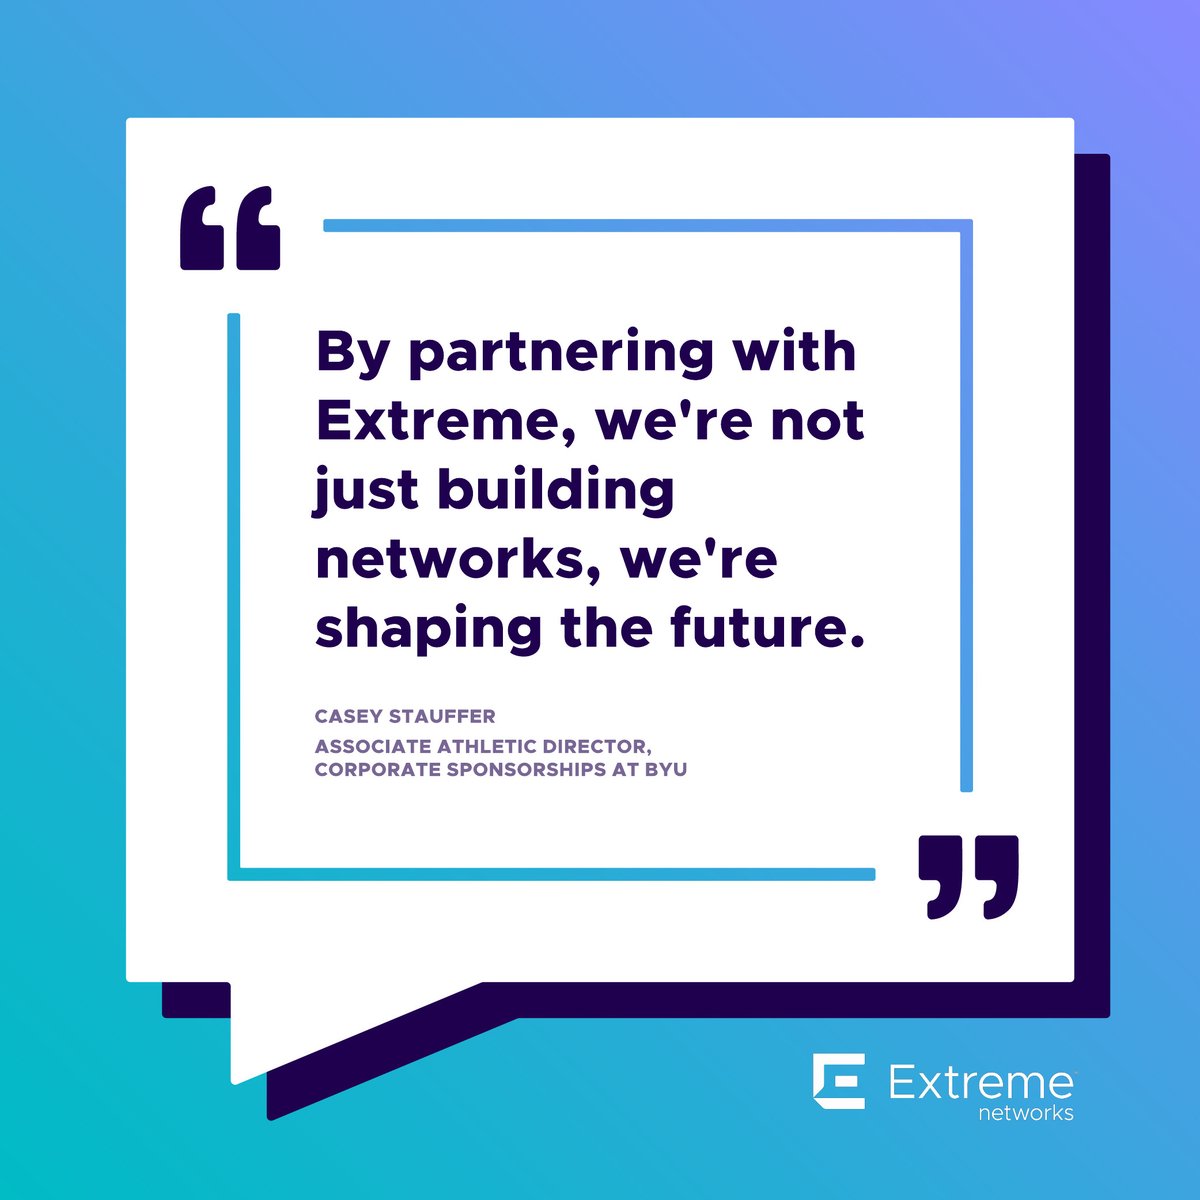 Brigham Young University's LaVell Edwards Stadium will use its new outdoor #WiFi6E network to accommodate 64,000 fans each game day and improve fan experiences. Learn more: extremenetworks.com/resources/blog… #fanexperience